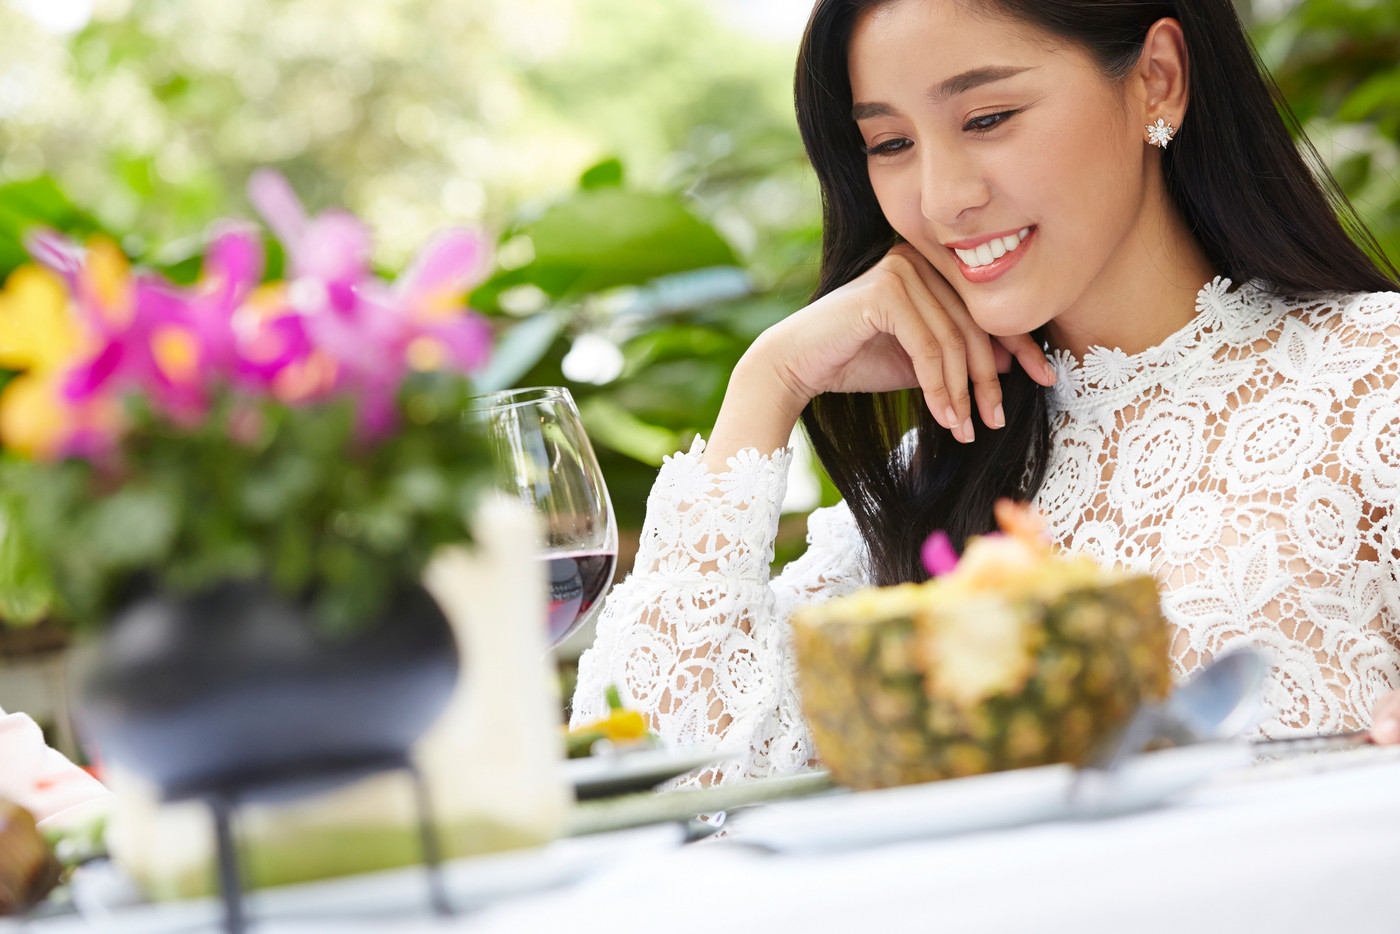 a gorgeous lady is smiling and looking at wine glass on a table in a restaurant